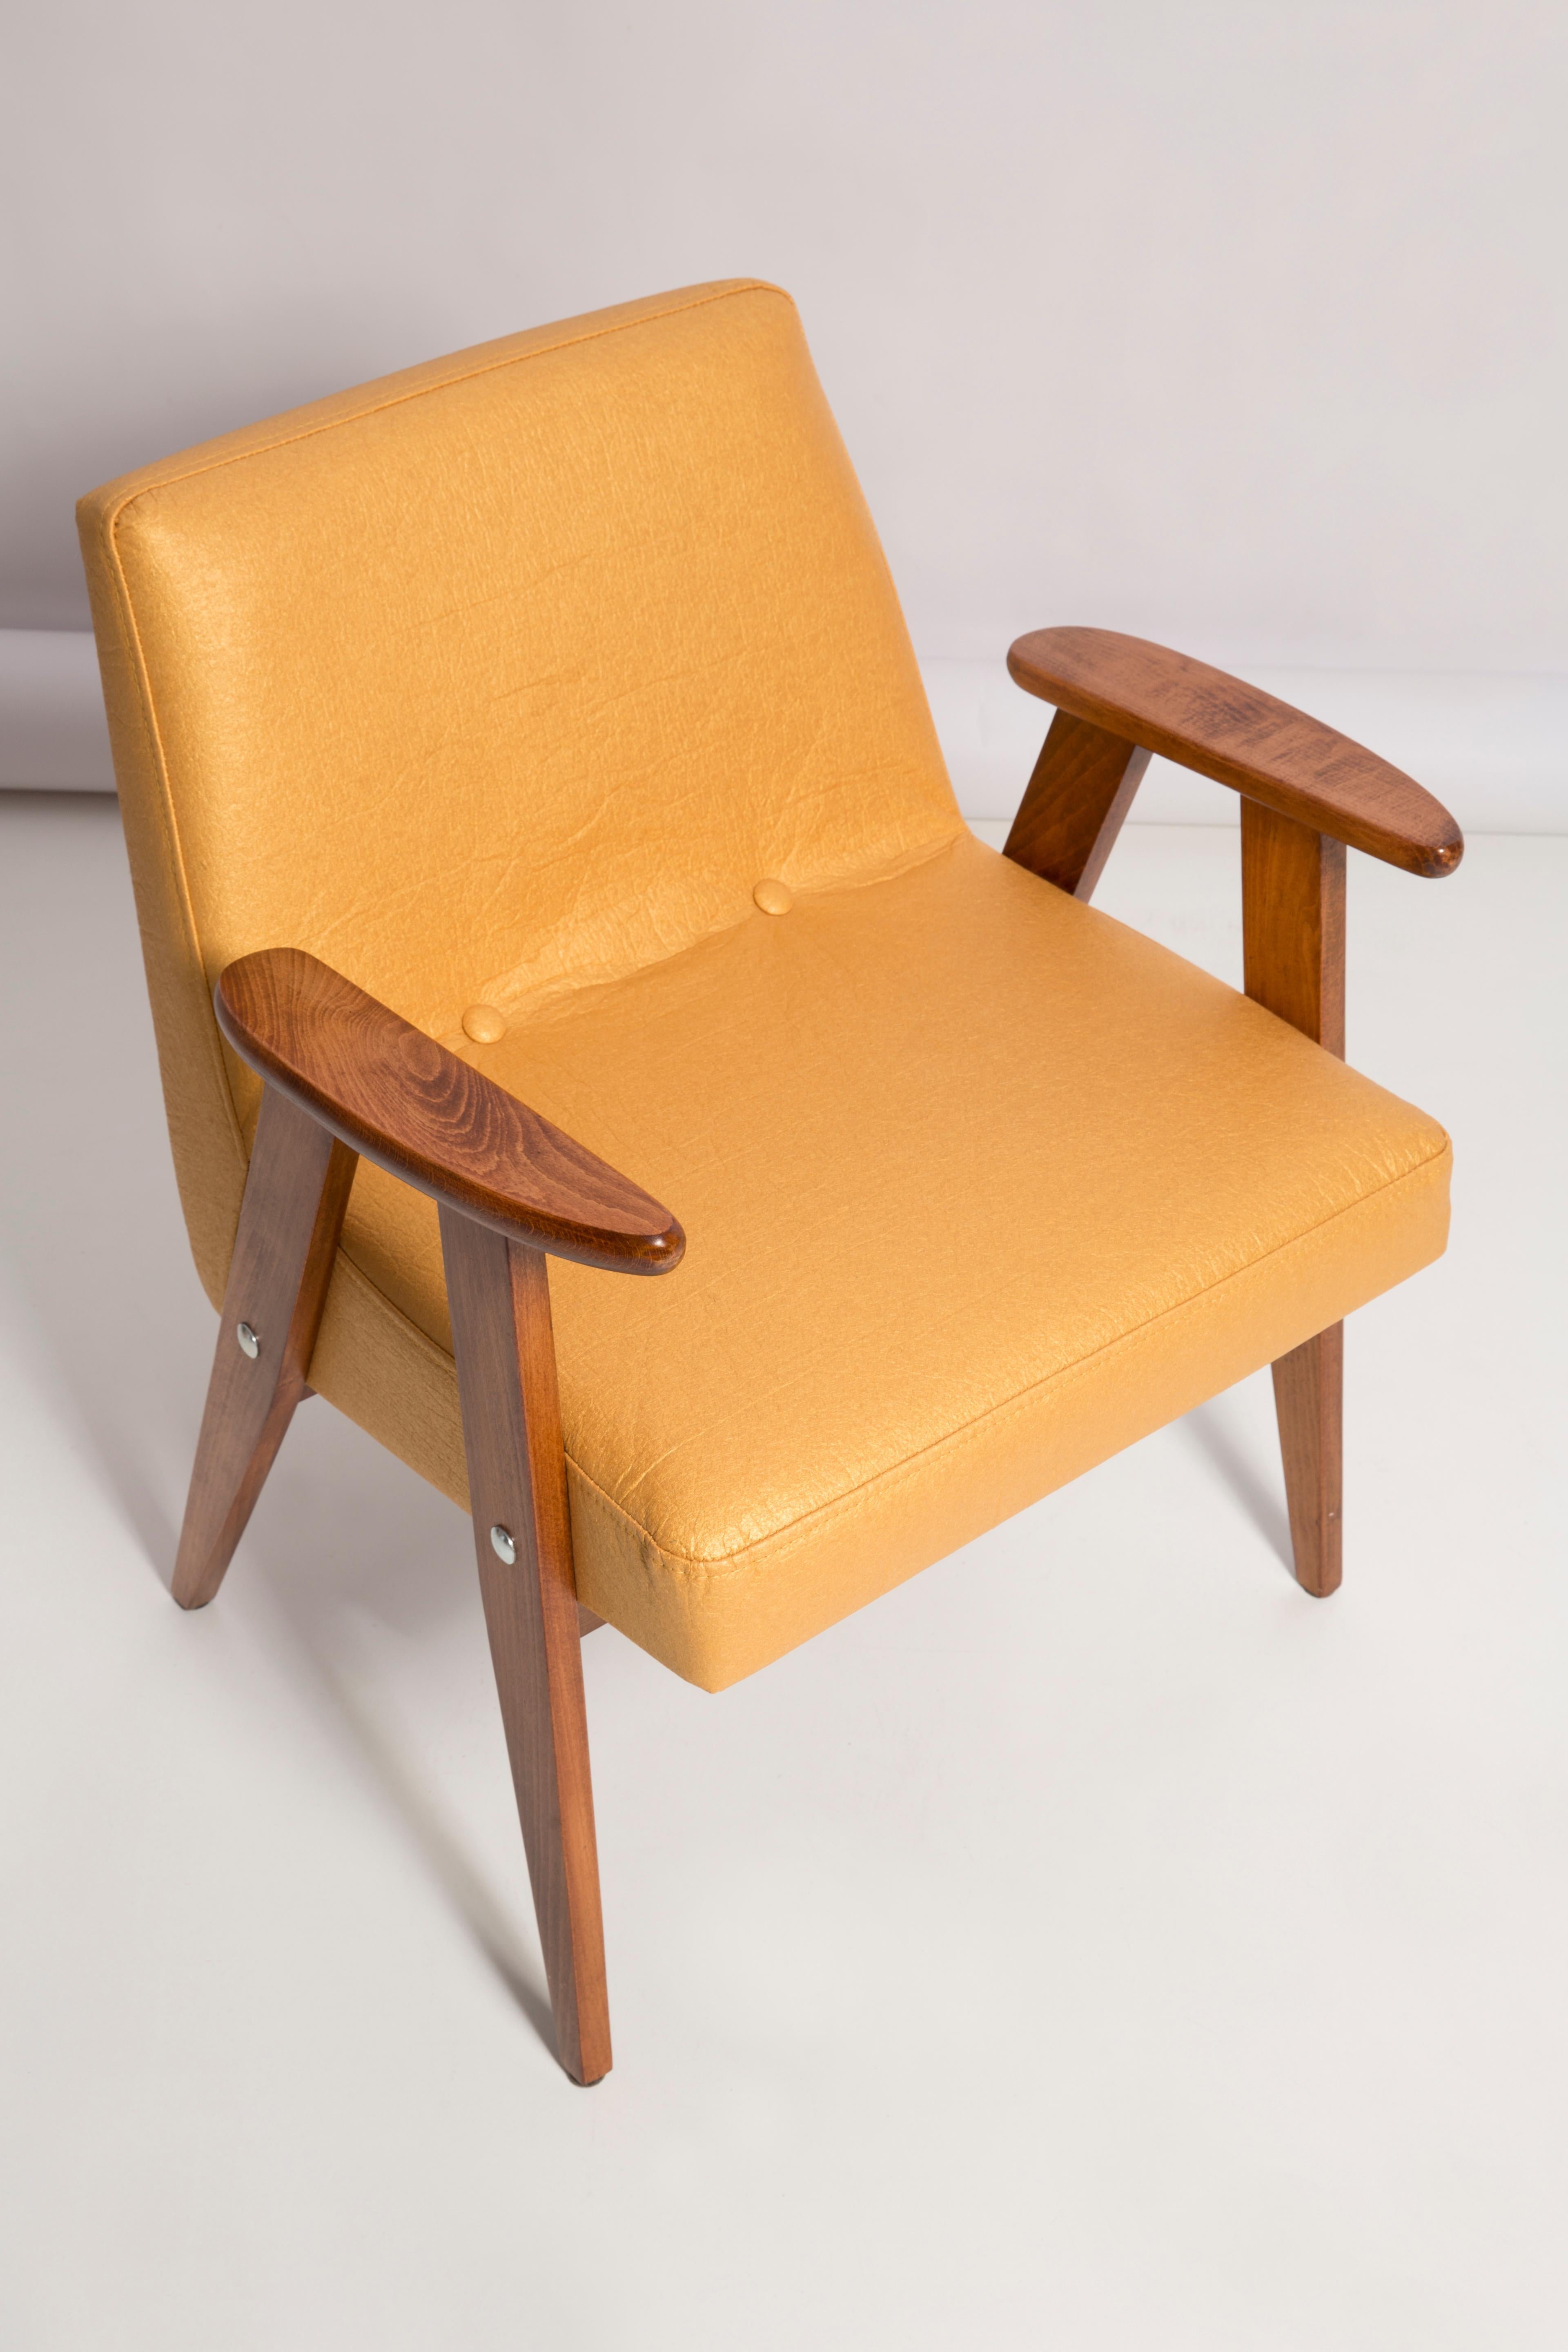 Polish Two Midcentury 366 Club Armchairs in Pineapple Leather, Jozef Chierowski, 1960s For Sale